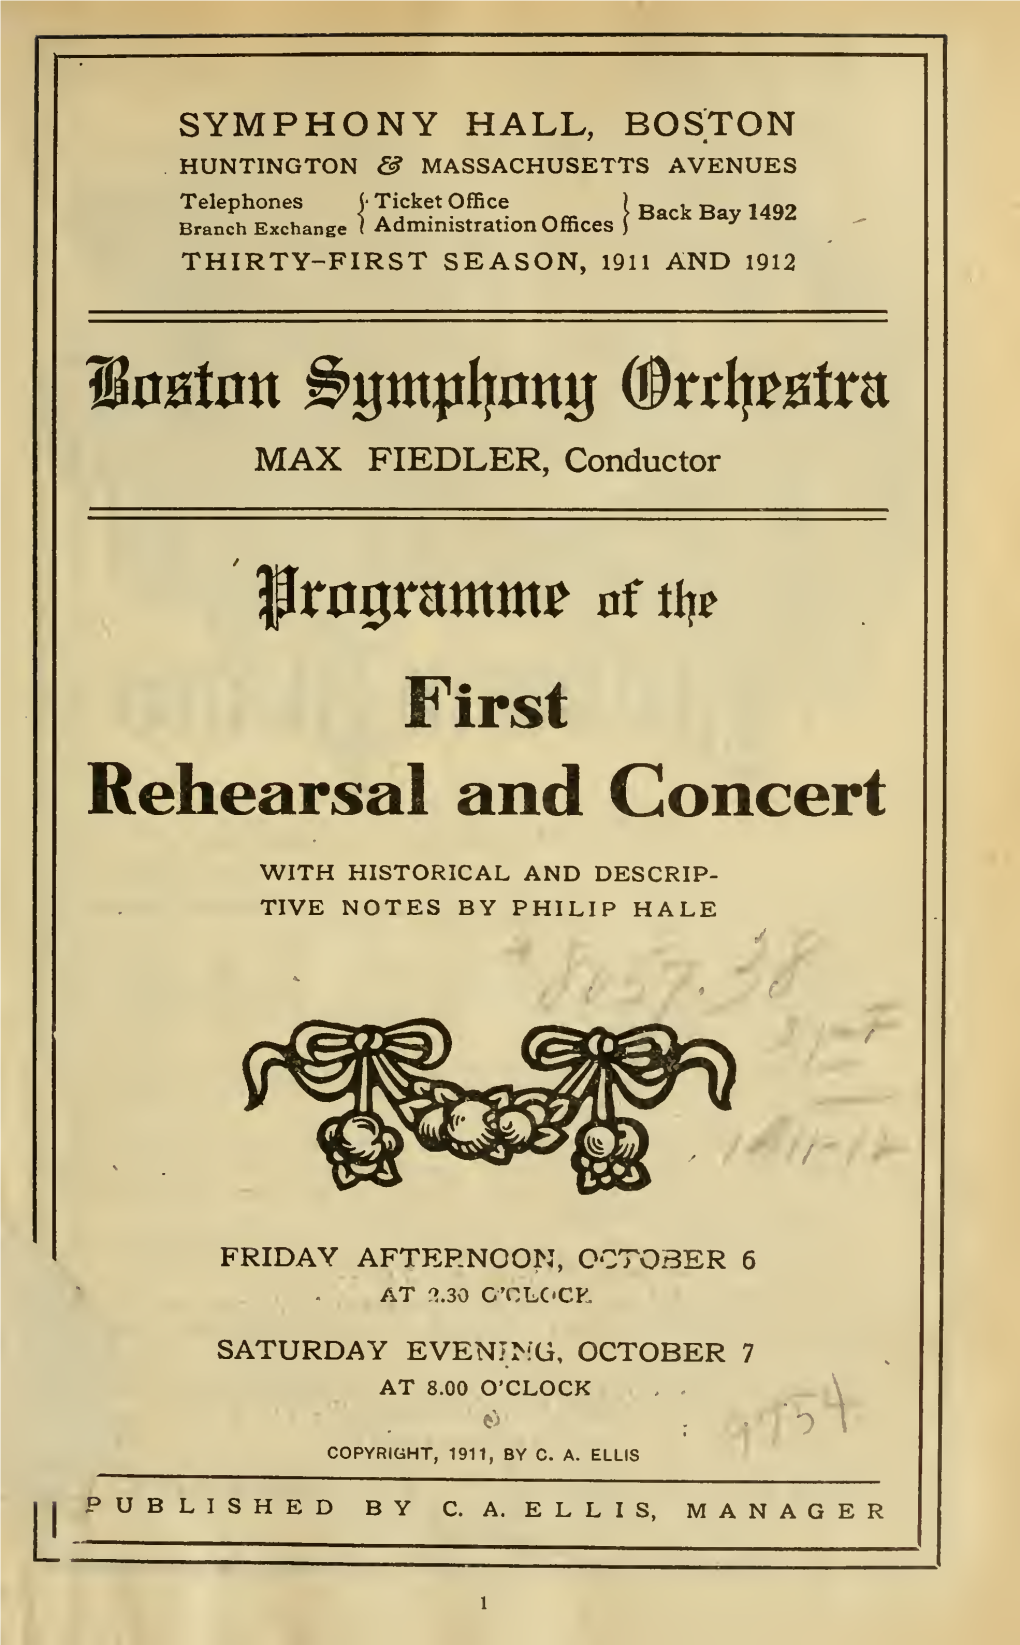 Rehearsal and Concert